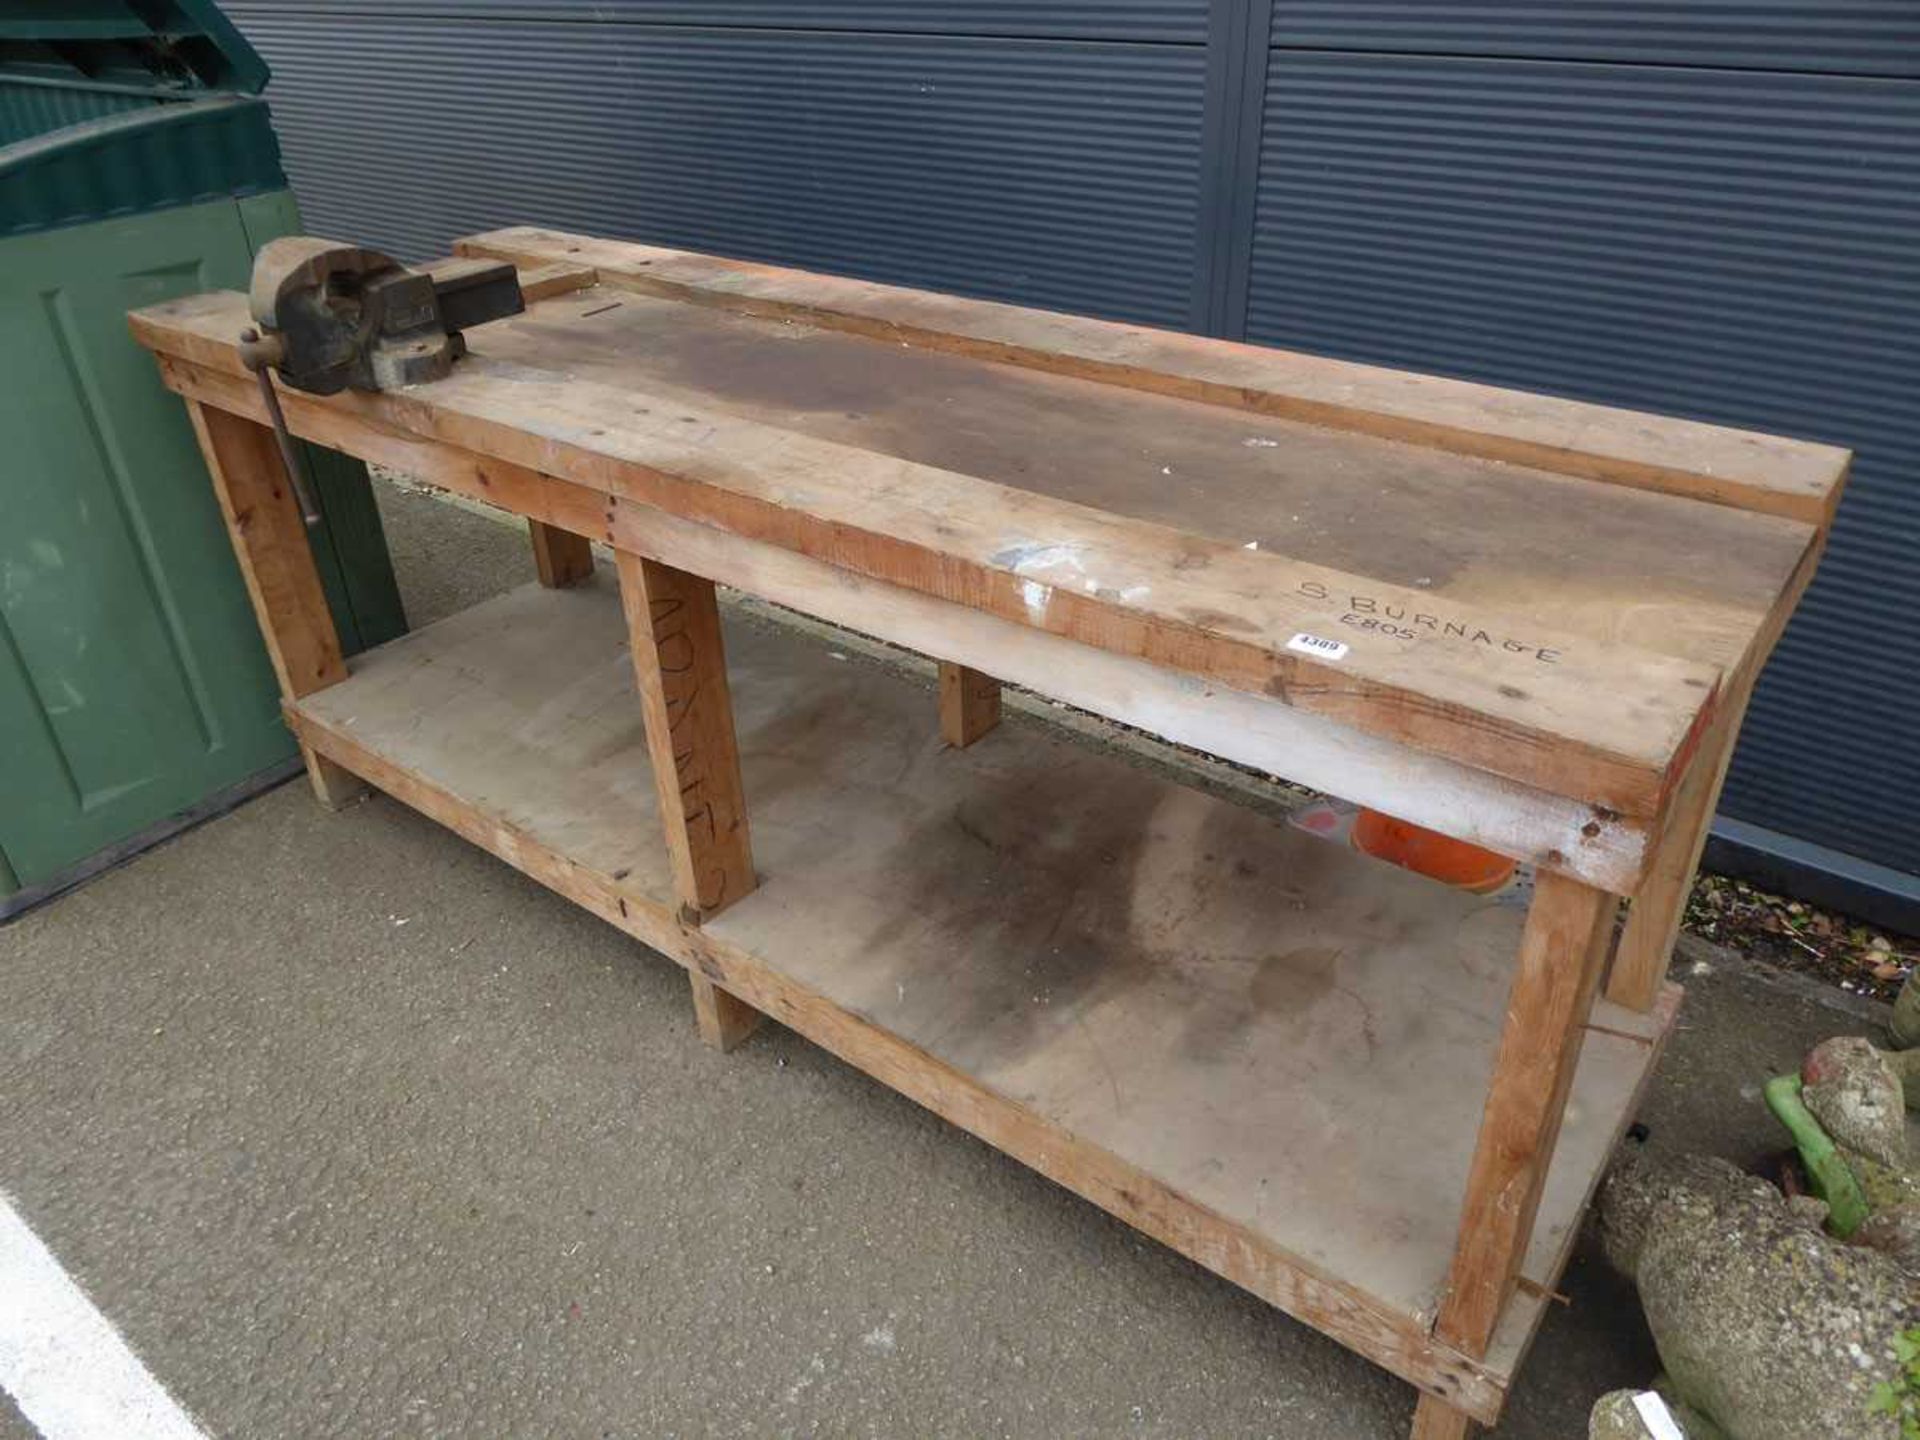 Large wooden work bench with metal vice